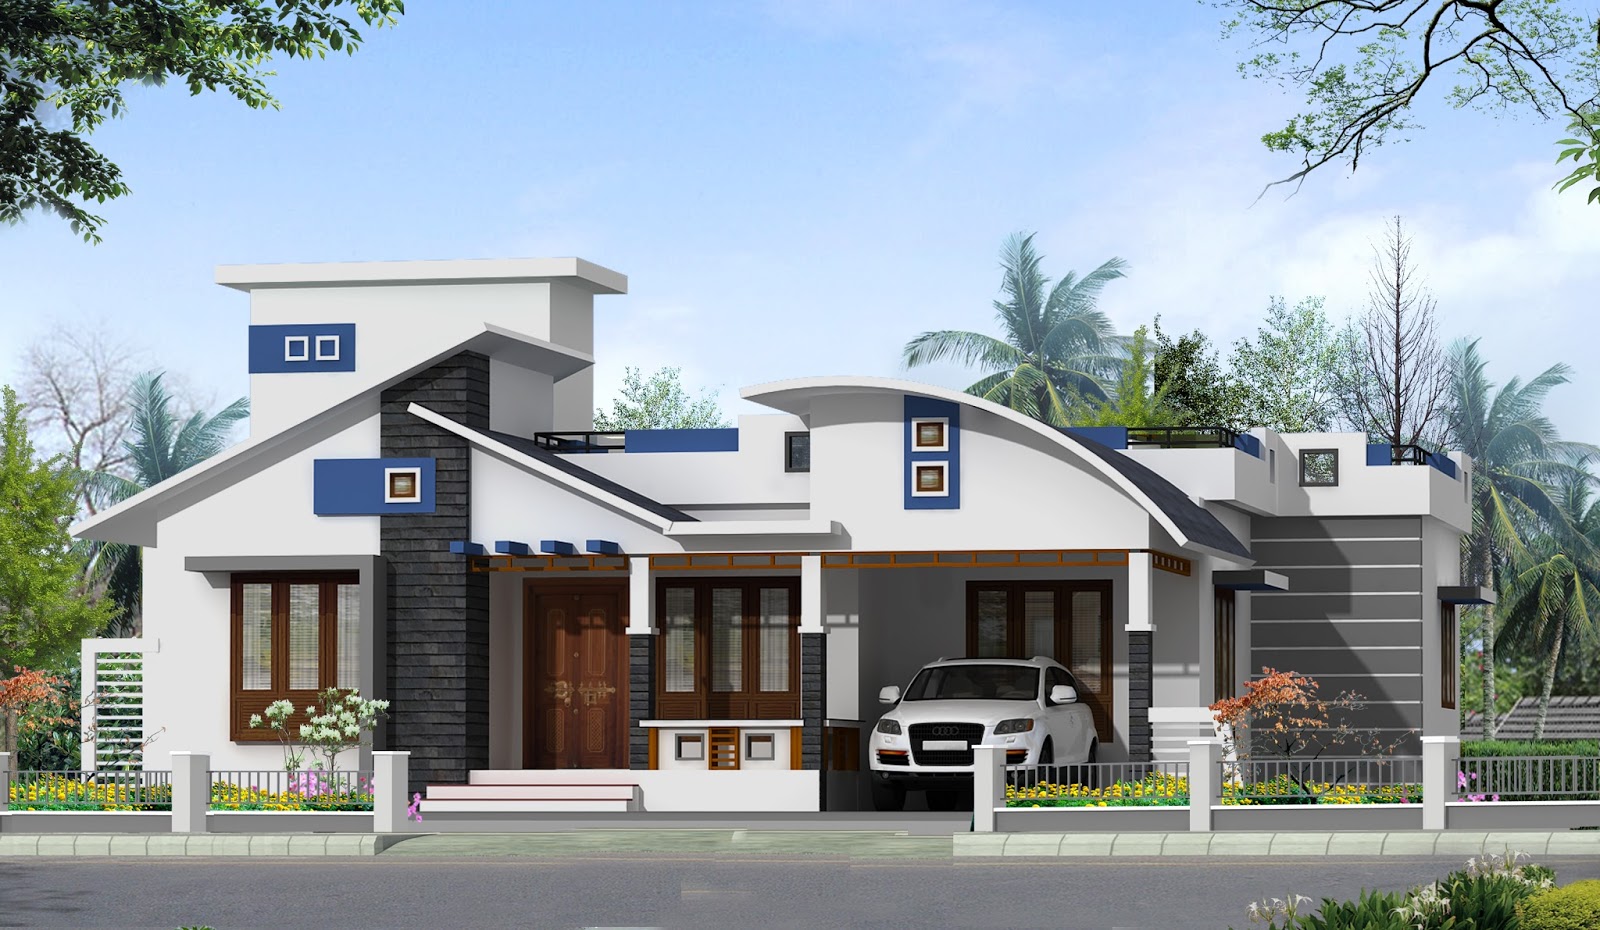  House  Designs  New home  designs  latest modern  house  